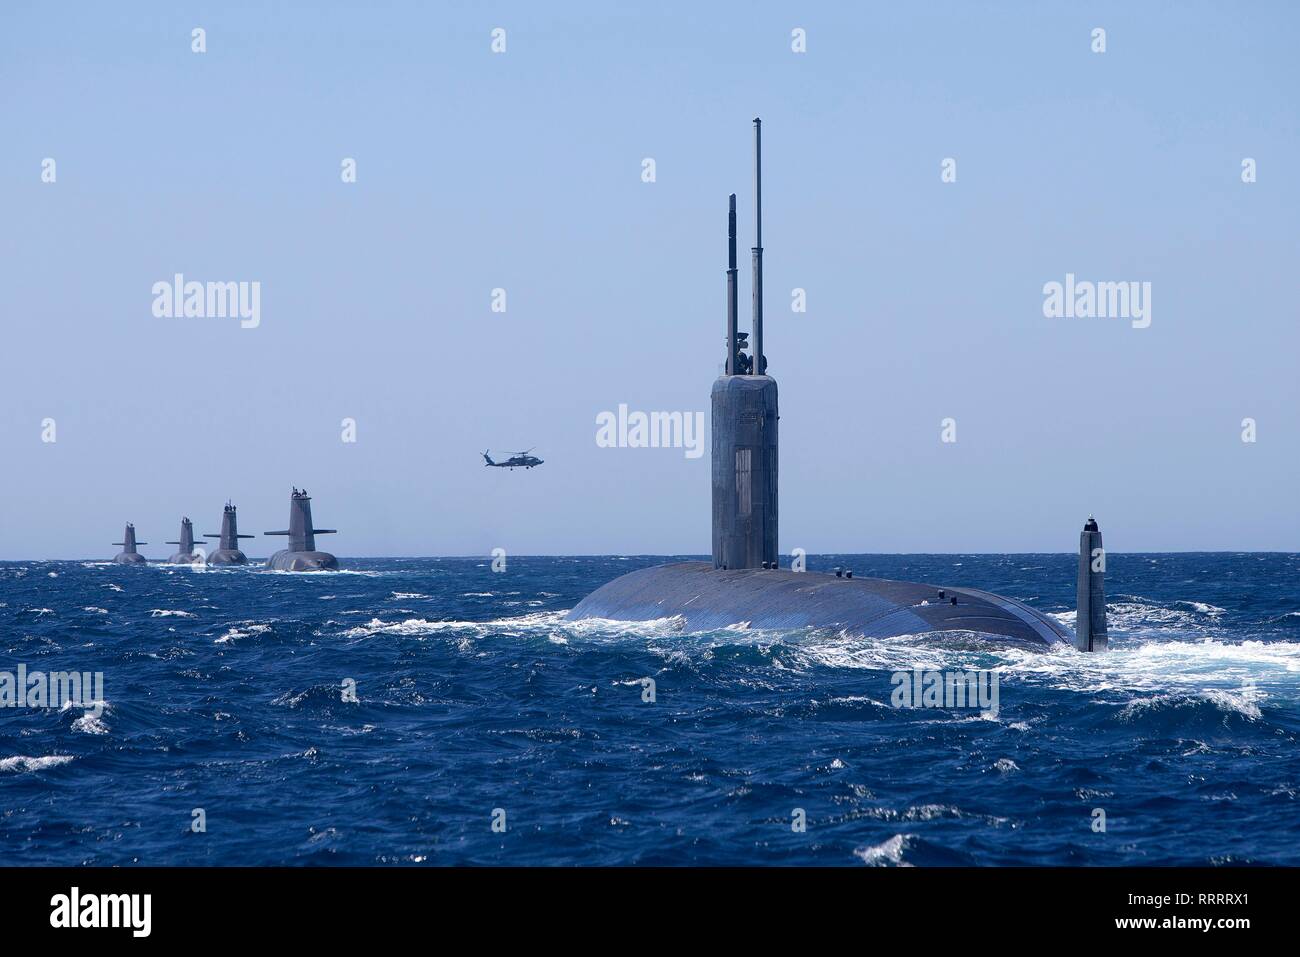 The U.S. Navy Los Angeles-class attack submarine USS Santa Fe sails in formation with Royal Australian Navy Collins class submarines HMAS Collins, HMAS Farncomb, HMAS Dechaineux and HMAS Sheean, as an Australian MH-60R Seahawk helicopter flies overhead in the West Australian exercise area February 18, 2019 off the coast of Fremantle, Australia. Stock Photo